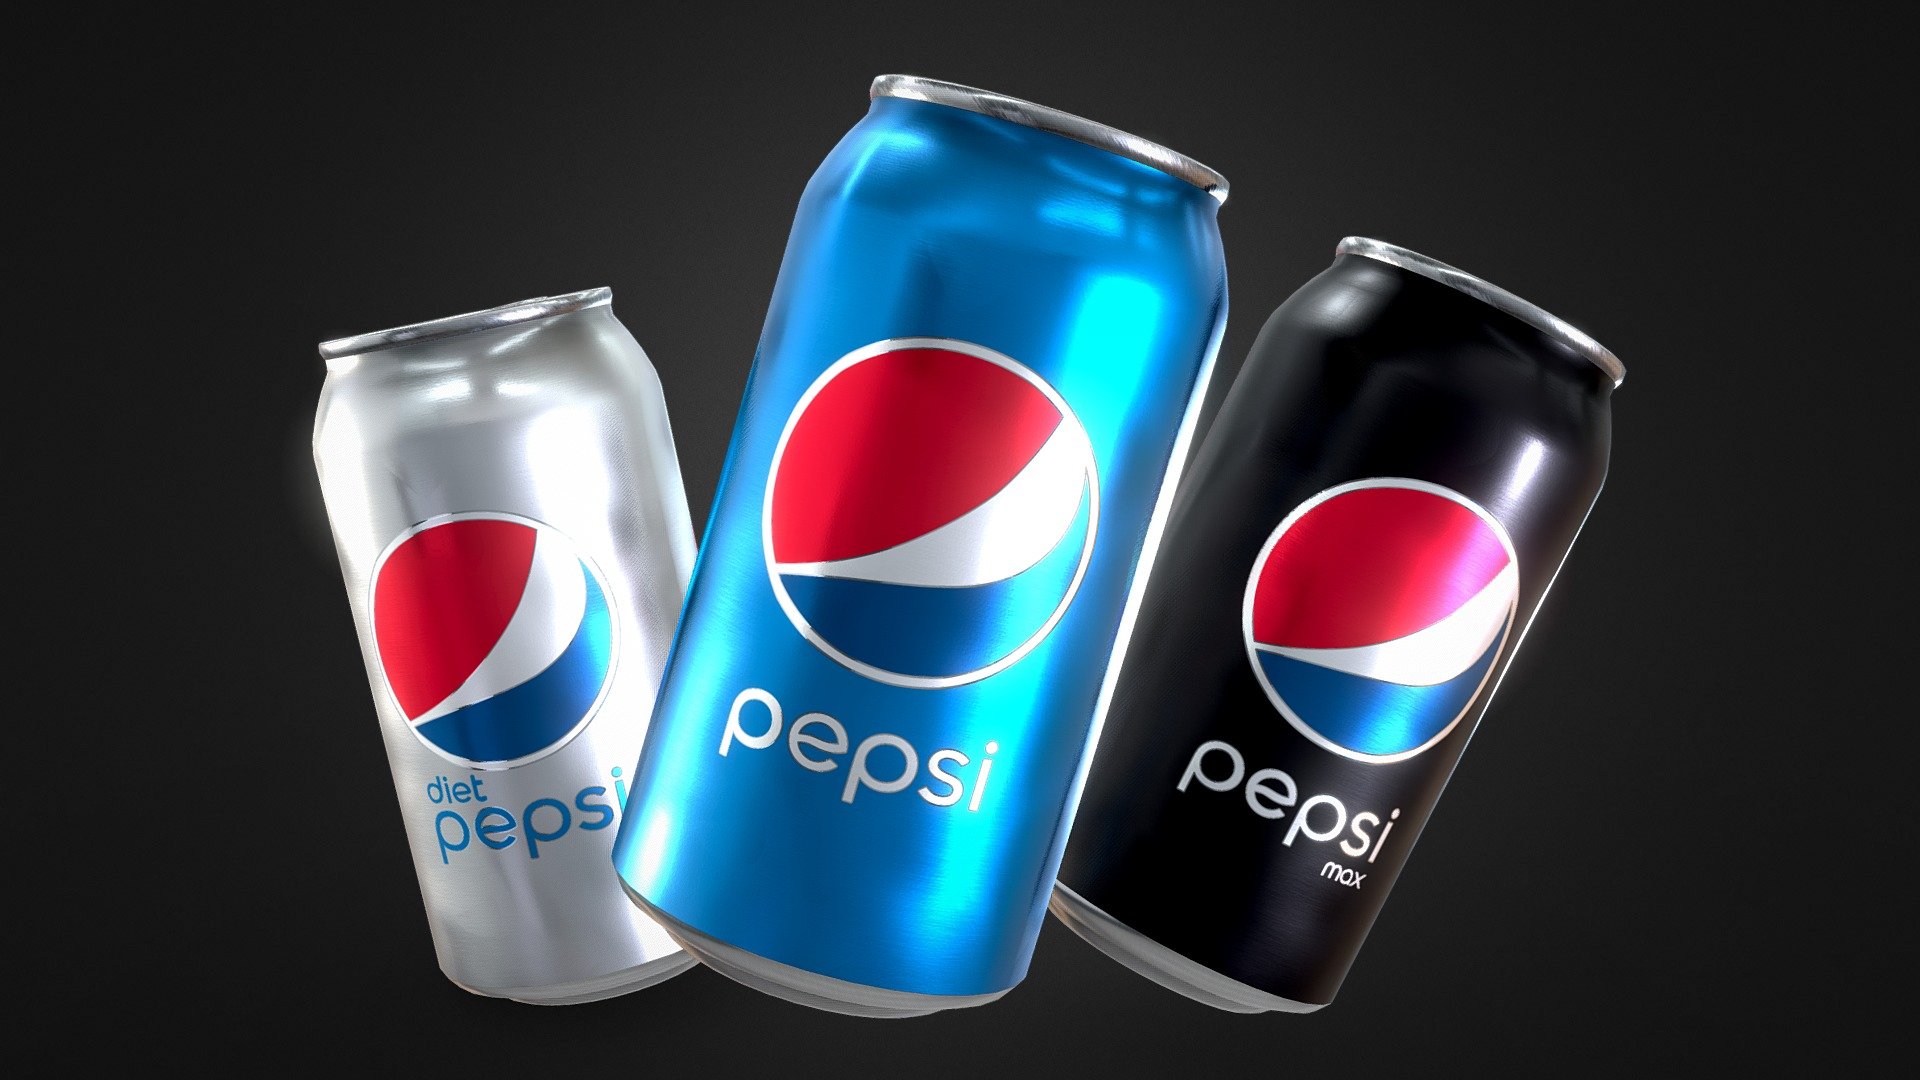 Pack of Pepsi (classic, zero and diet) cans with a PBR workflow, mainly suitable for archviz/realistic purposes, but can also be used for VR/AR projects and as a game asset.

The model contains a Zip file, with:




2 Versions for every file format: Beveled - suitable for subdivision and/or smooth shading, Subdivided - subdivided in advance;

Tailored textures with multiple resolutions (2K, 4K) for a PBR Metalness workflow, such as DIFFUSE/METALLIC/ROUGHNESS/NORMAL, multiple versions of textures - open and closed lid;

Both OpenGL and DirectX normal maps;

An additional preview scene with a camera, lights, and a background;

All model versions include UV unwrapping, appropriate pivot/origin points and object parenting;

Formats: 




fbx.

obj.

dae.

blend.




Scale: Real World - Metric

Dimensions cm: 6.3 x 6.3 x 12.5 (2.5 x 2.5 x 4.9'&lsquo;)

Model parts: 2 (Can and tab)

Geometry: All quads with few appropriate triangles
 - Pepsi Cans - Classic, Zero, Diet, Cola Sodas - Buy Royalty Free 3D model by PatrickZhiaran 3d model